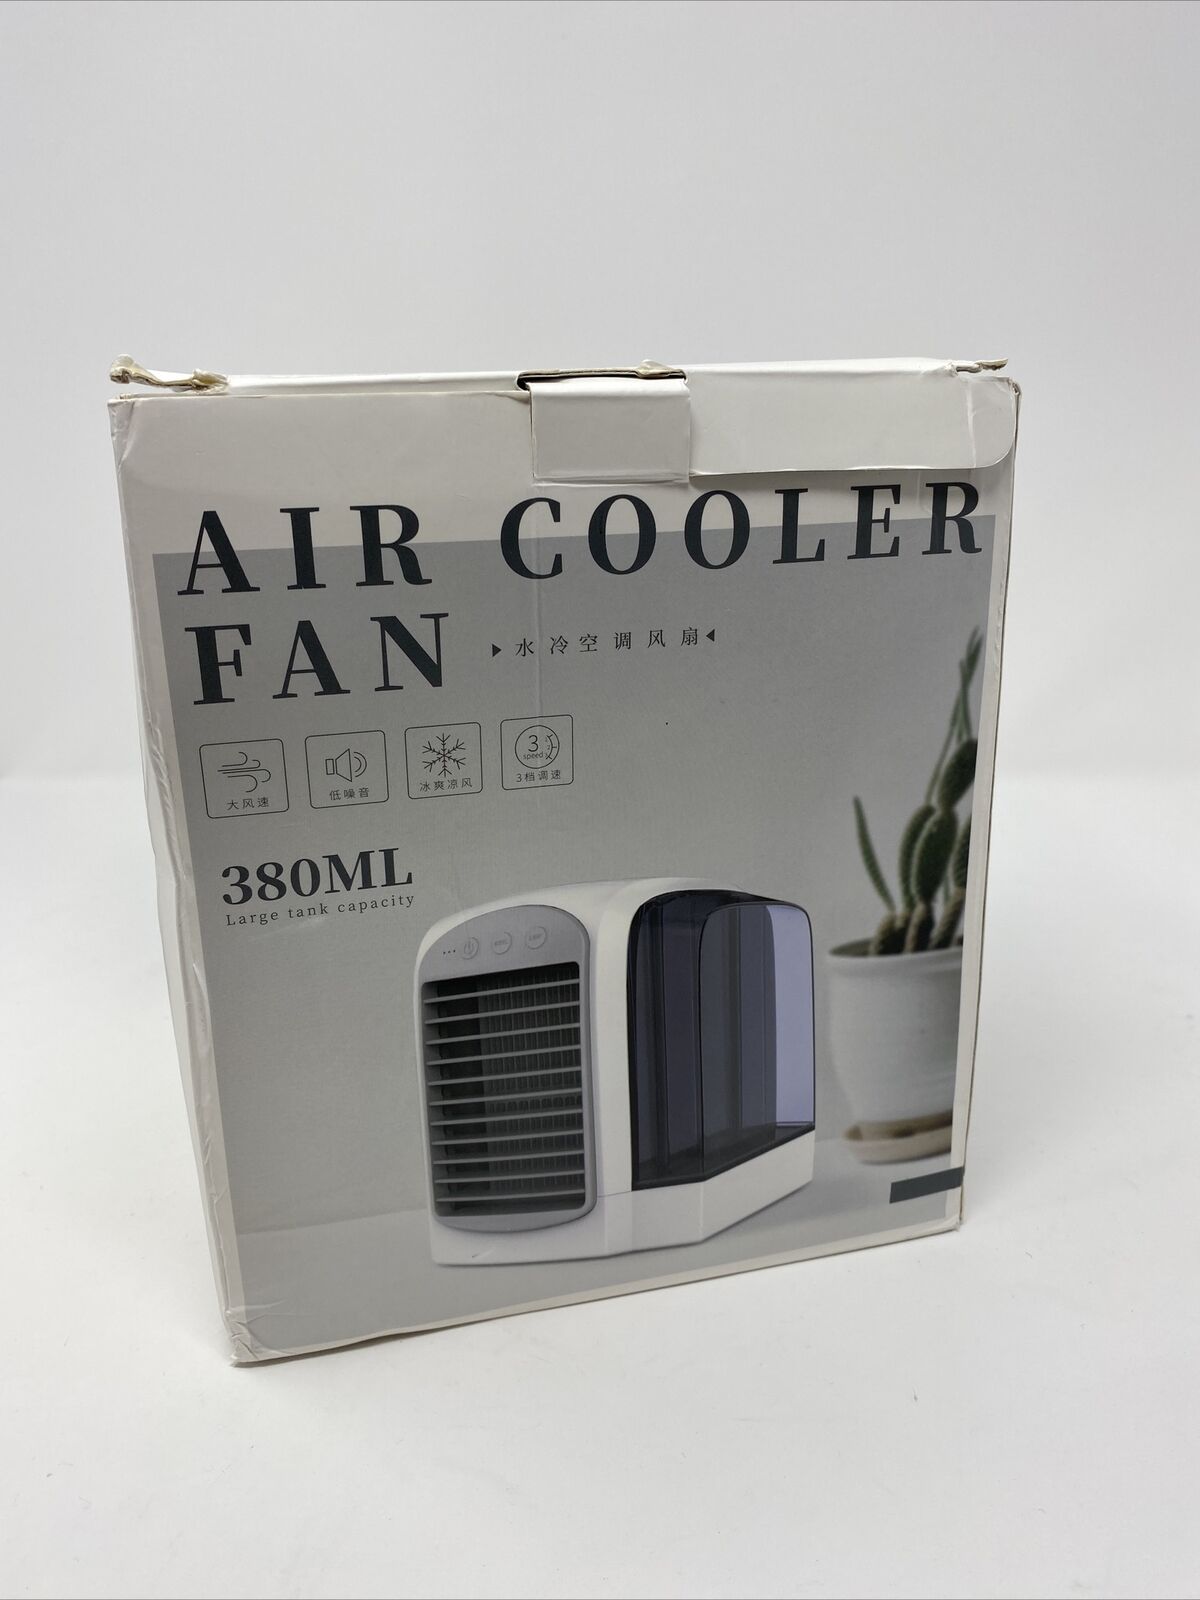 WT-F10 ZEN PORTABLE EUROPEAN STYLE WATER-COOLED FAN PERSONAL AIR COOLER 380ML